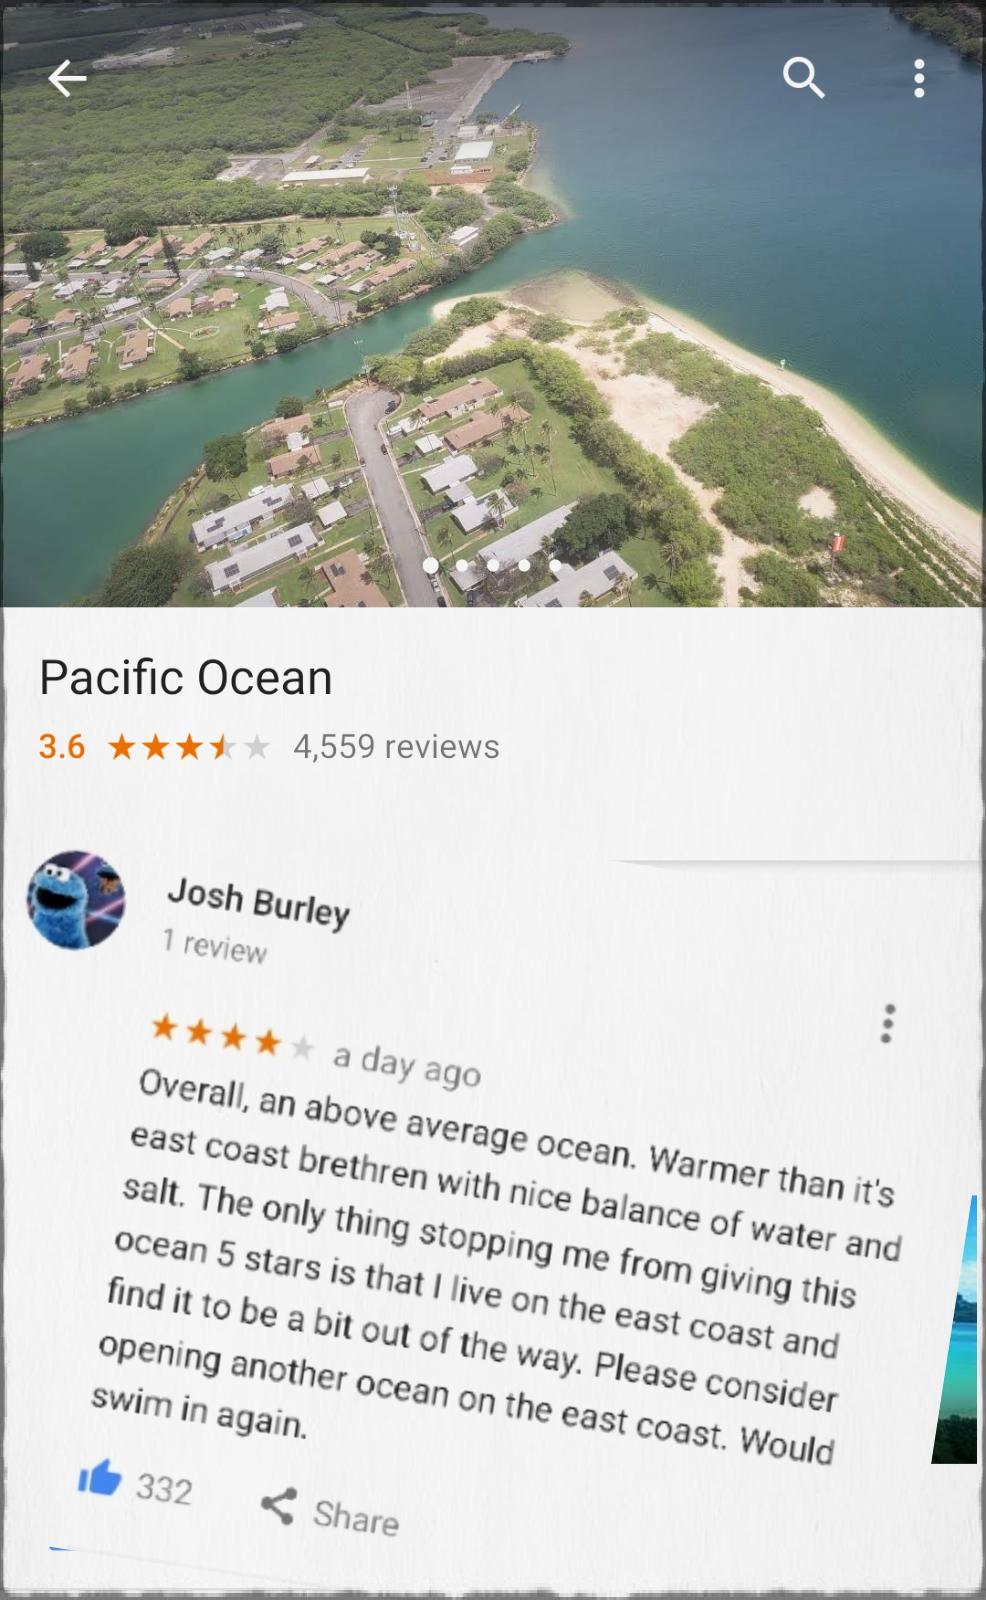 The Pacific Ocean, a review.